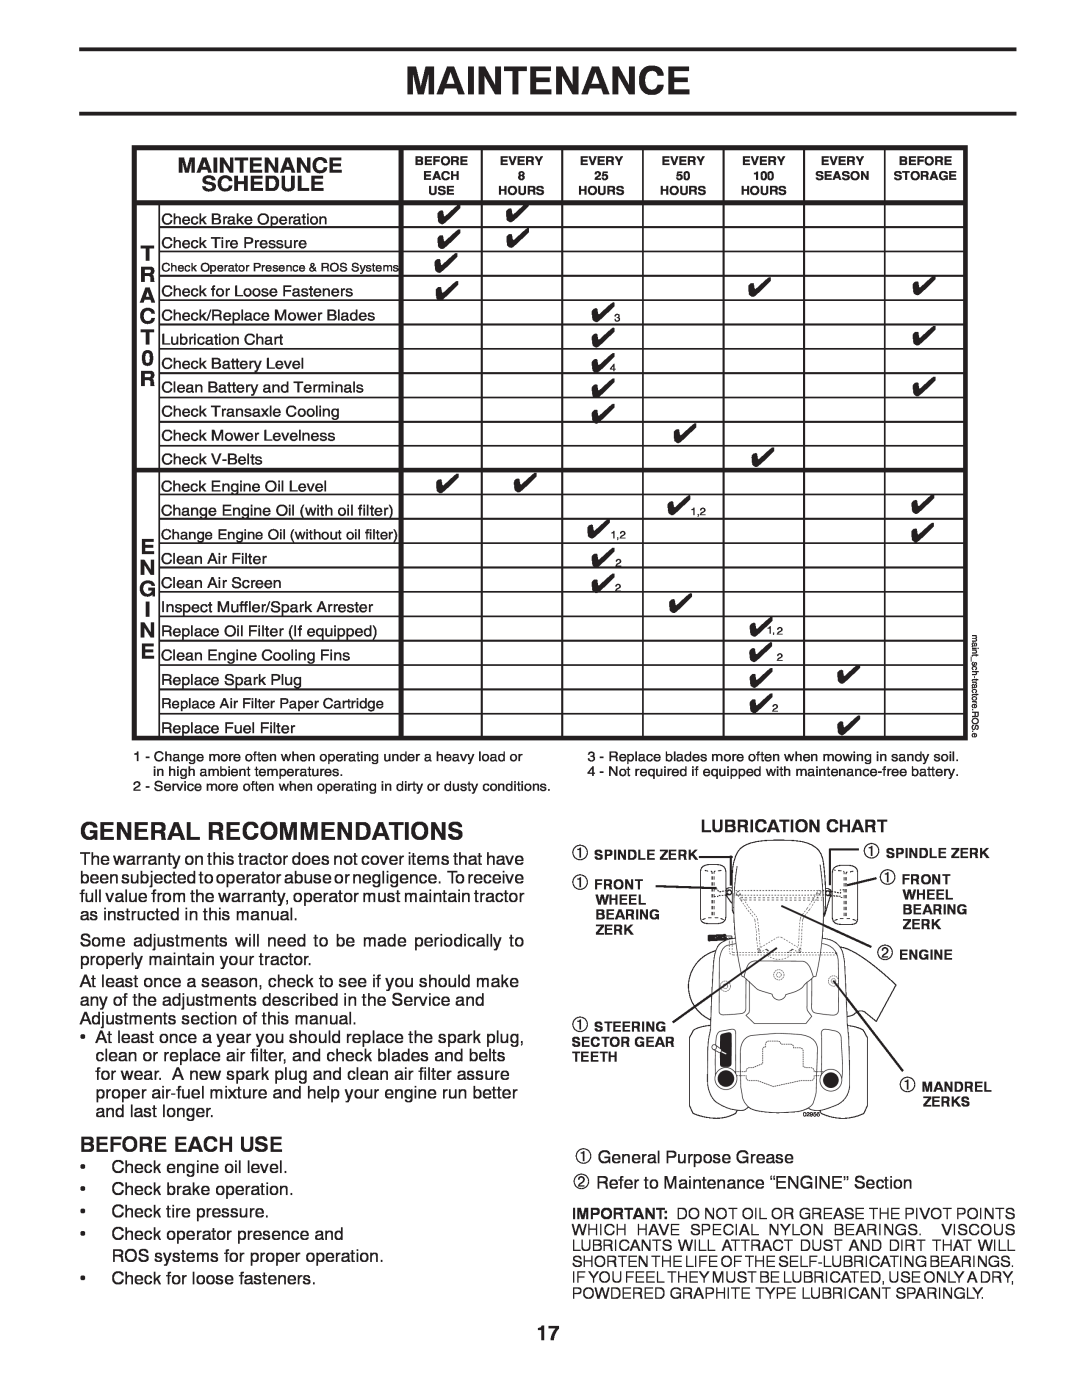 Poulan PBGT26H54 manual Maintenance, General Recommendations, Schedule, Before Each Use 